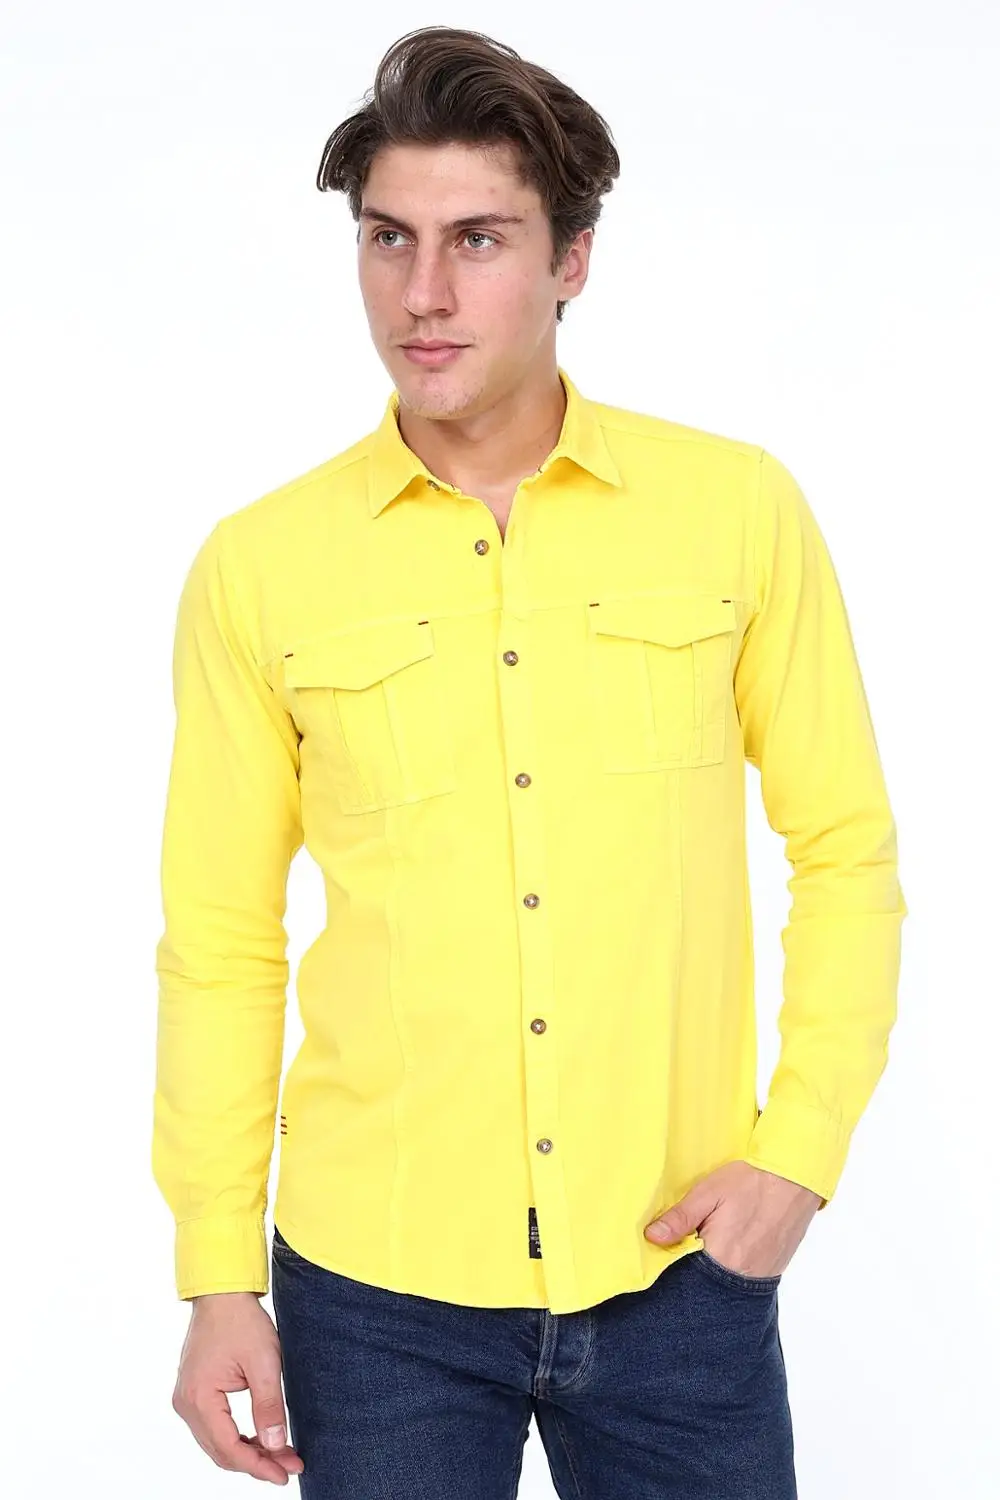 

RIV-SD MENS SHIRT YELLOW BRANDNEW St Valentines Gift For MEN'S 2020 STYLE SLIM FIT %100 COTTON, REAL EUROPEAN SIZE, ISTANBUL